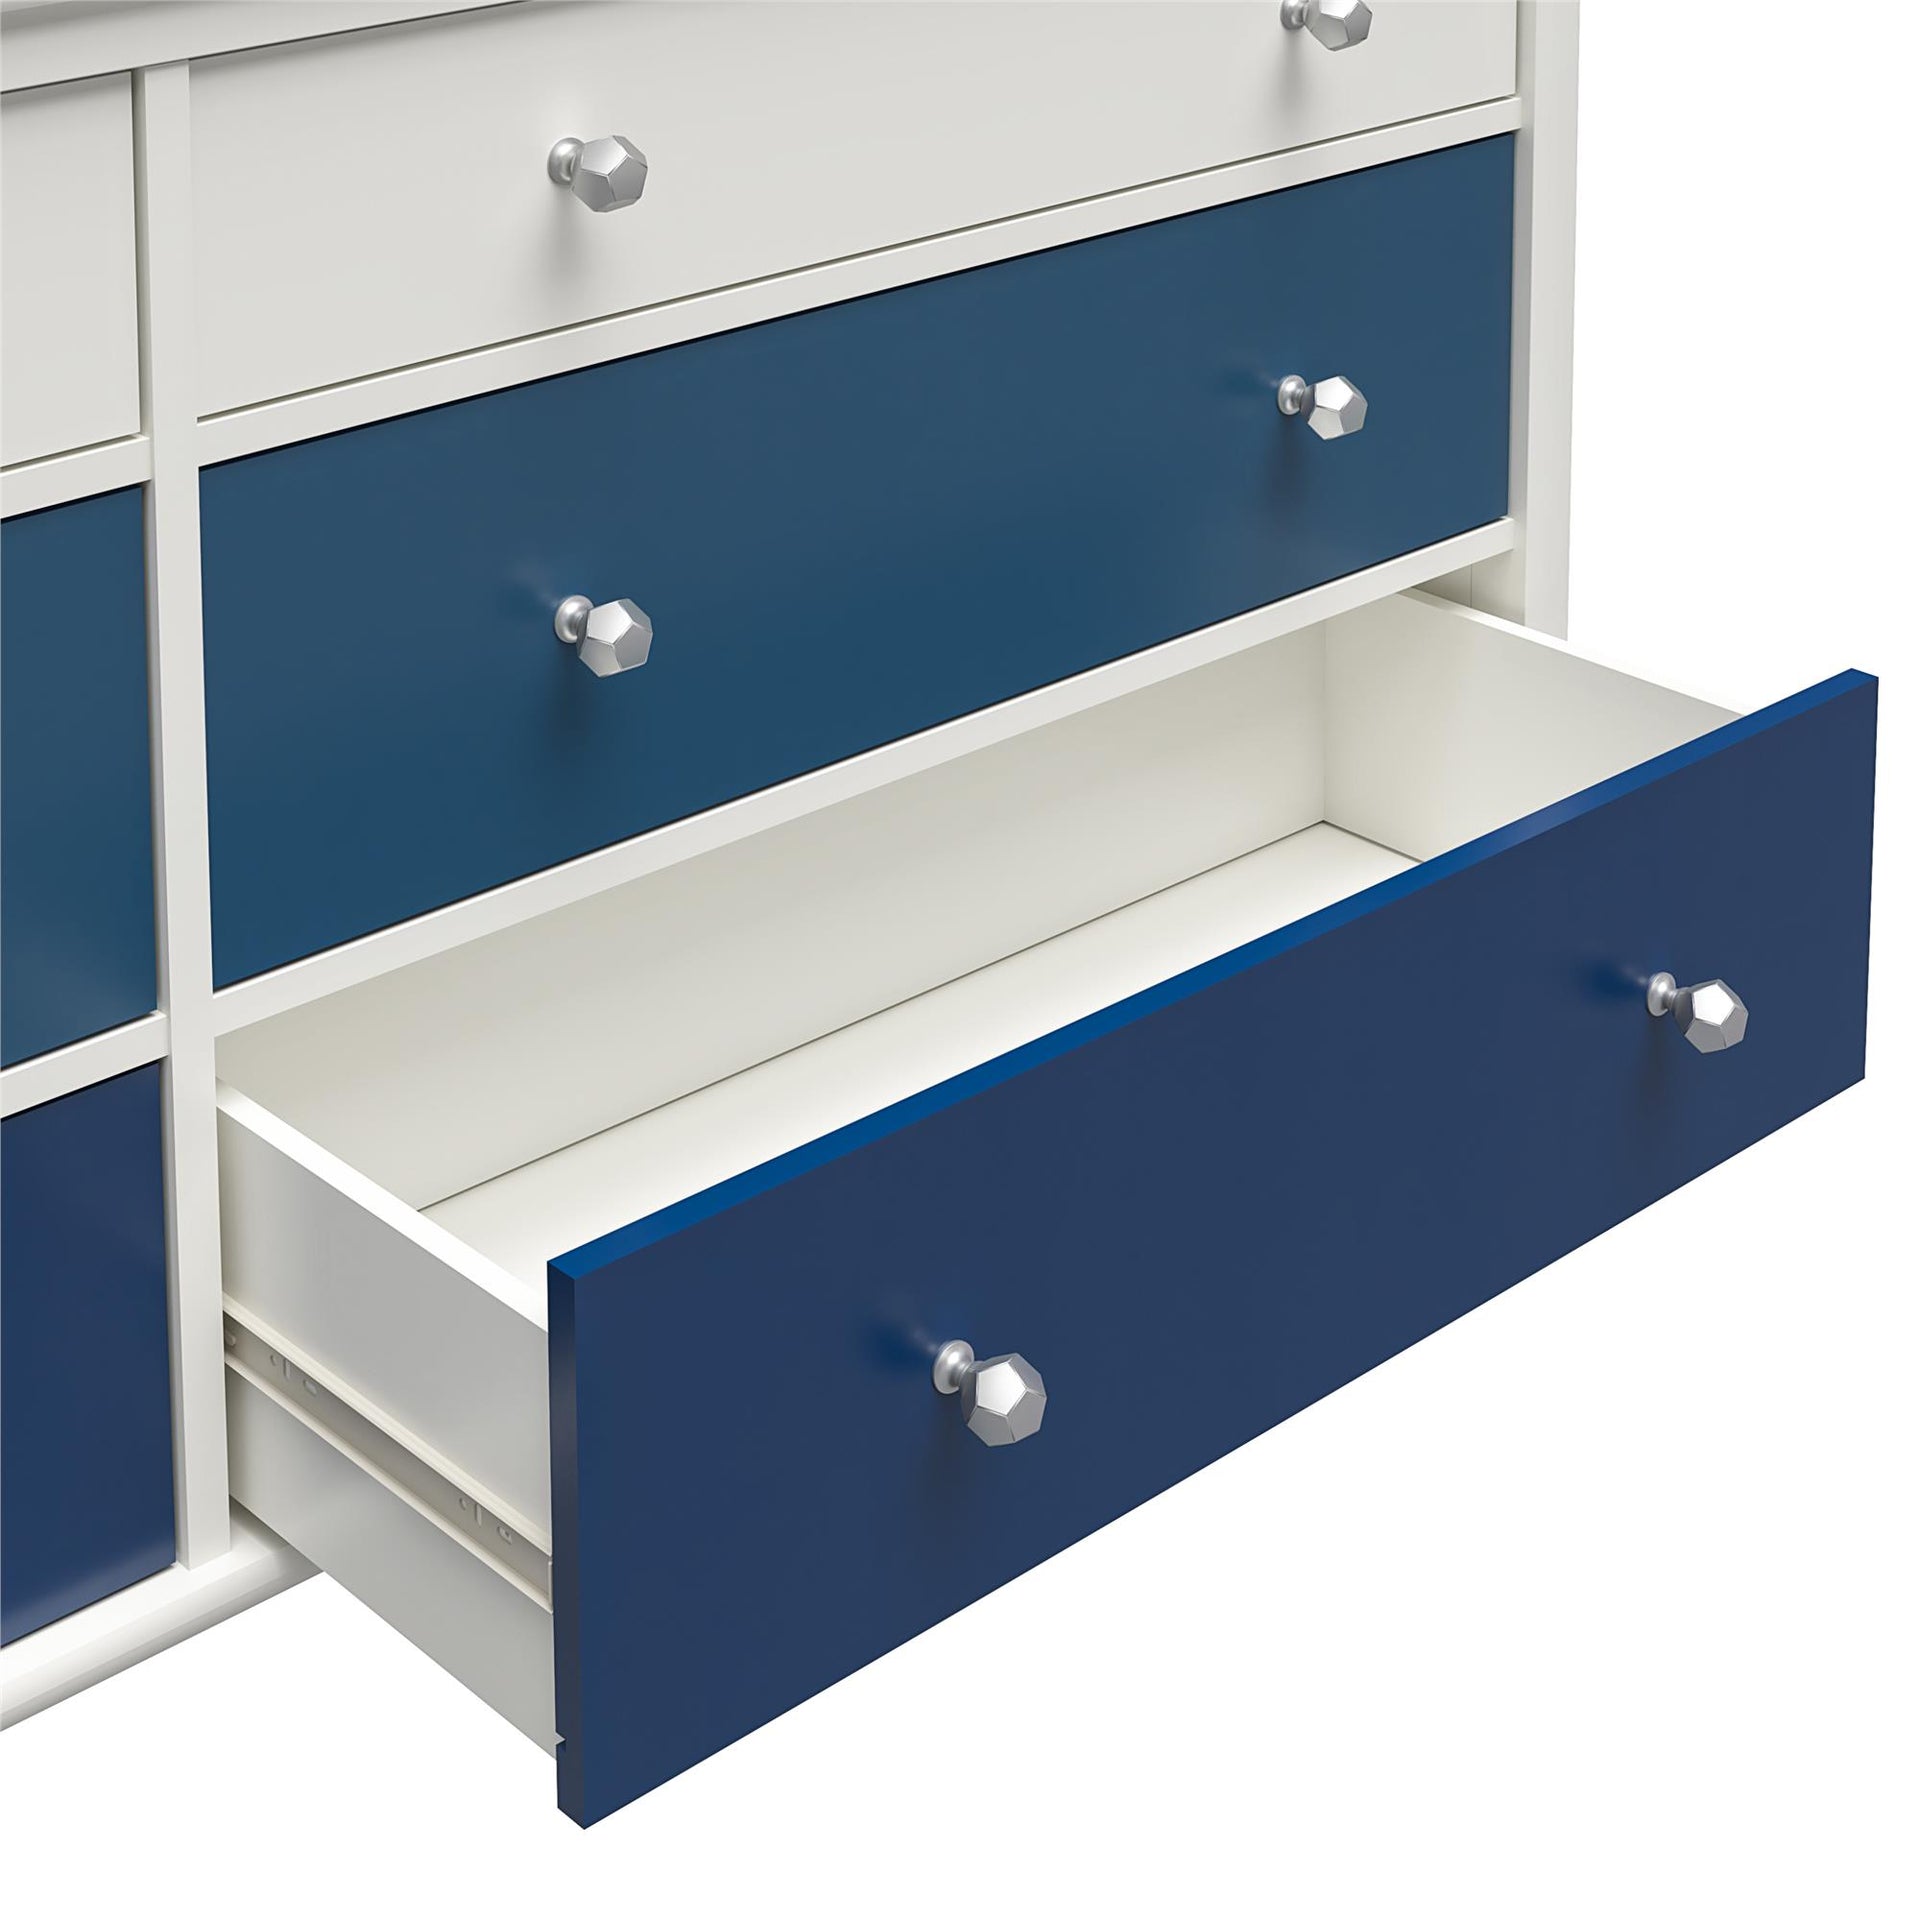 Monarch Hill Poppy 6 Drawer Changing Table - Blue